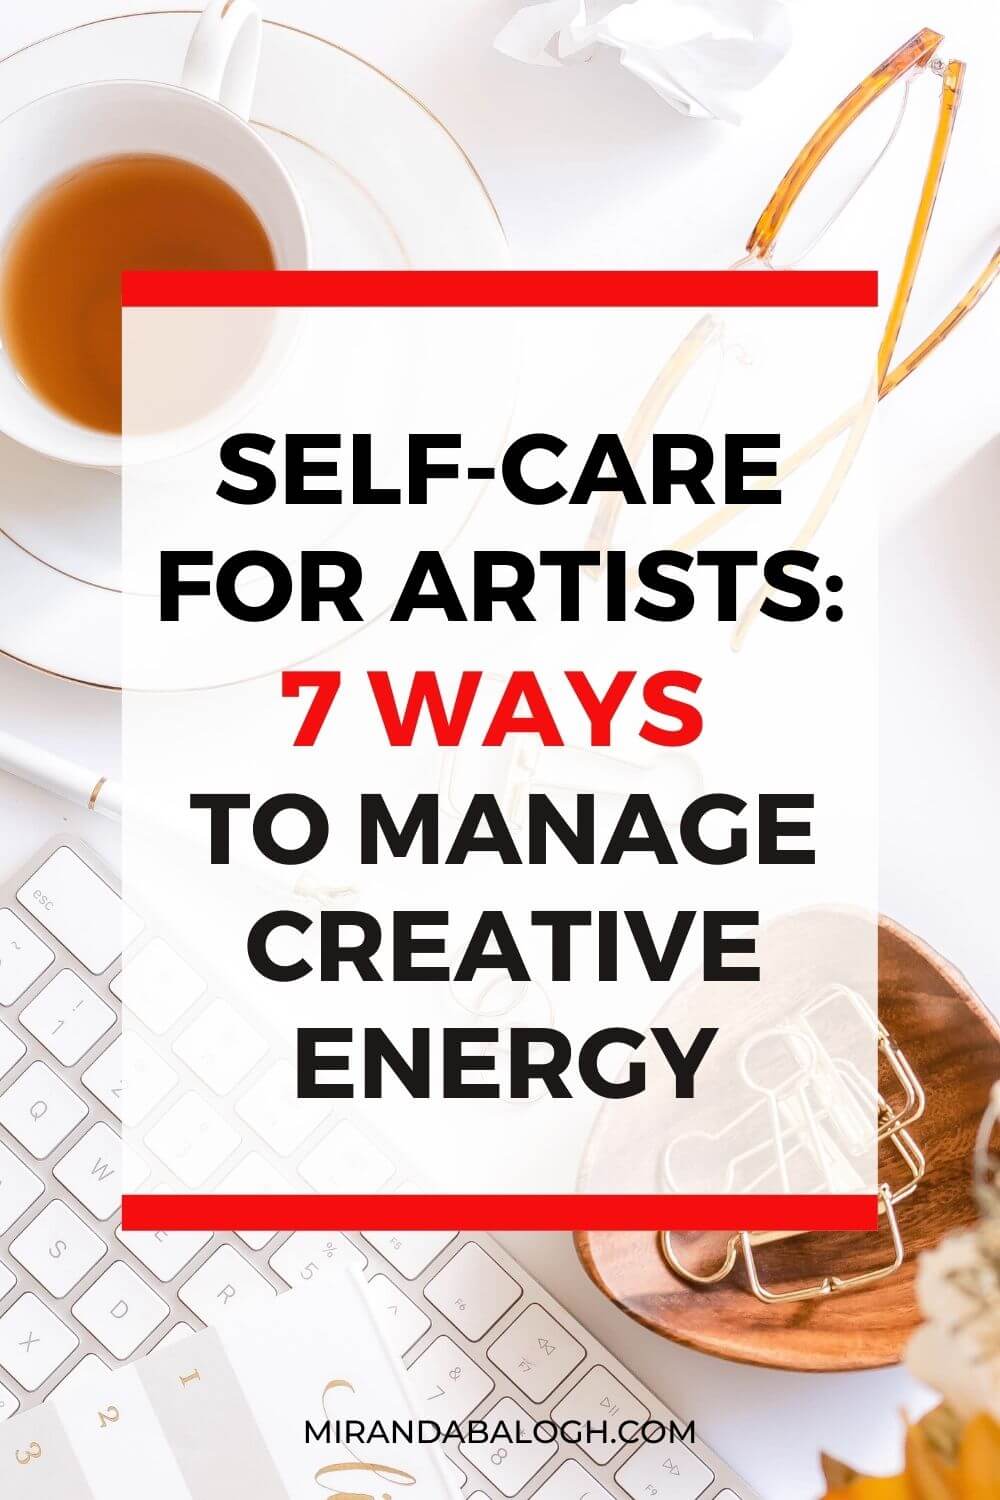 As an artist, it’s important for you to learn how to manage your creative energy for optimal success. Luckily for you, these 7 tips about self-care for artists will teach you how to manage your stress, reduce overwhelm, and promote good health. By embracing creative self-care, you will be able to improve your time management skills and productivity without suffering from creative burnout.